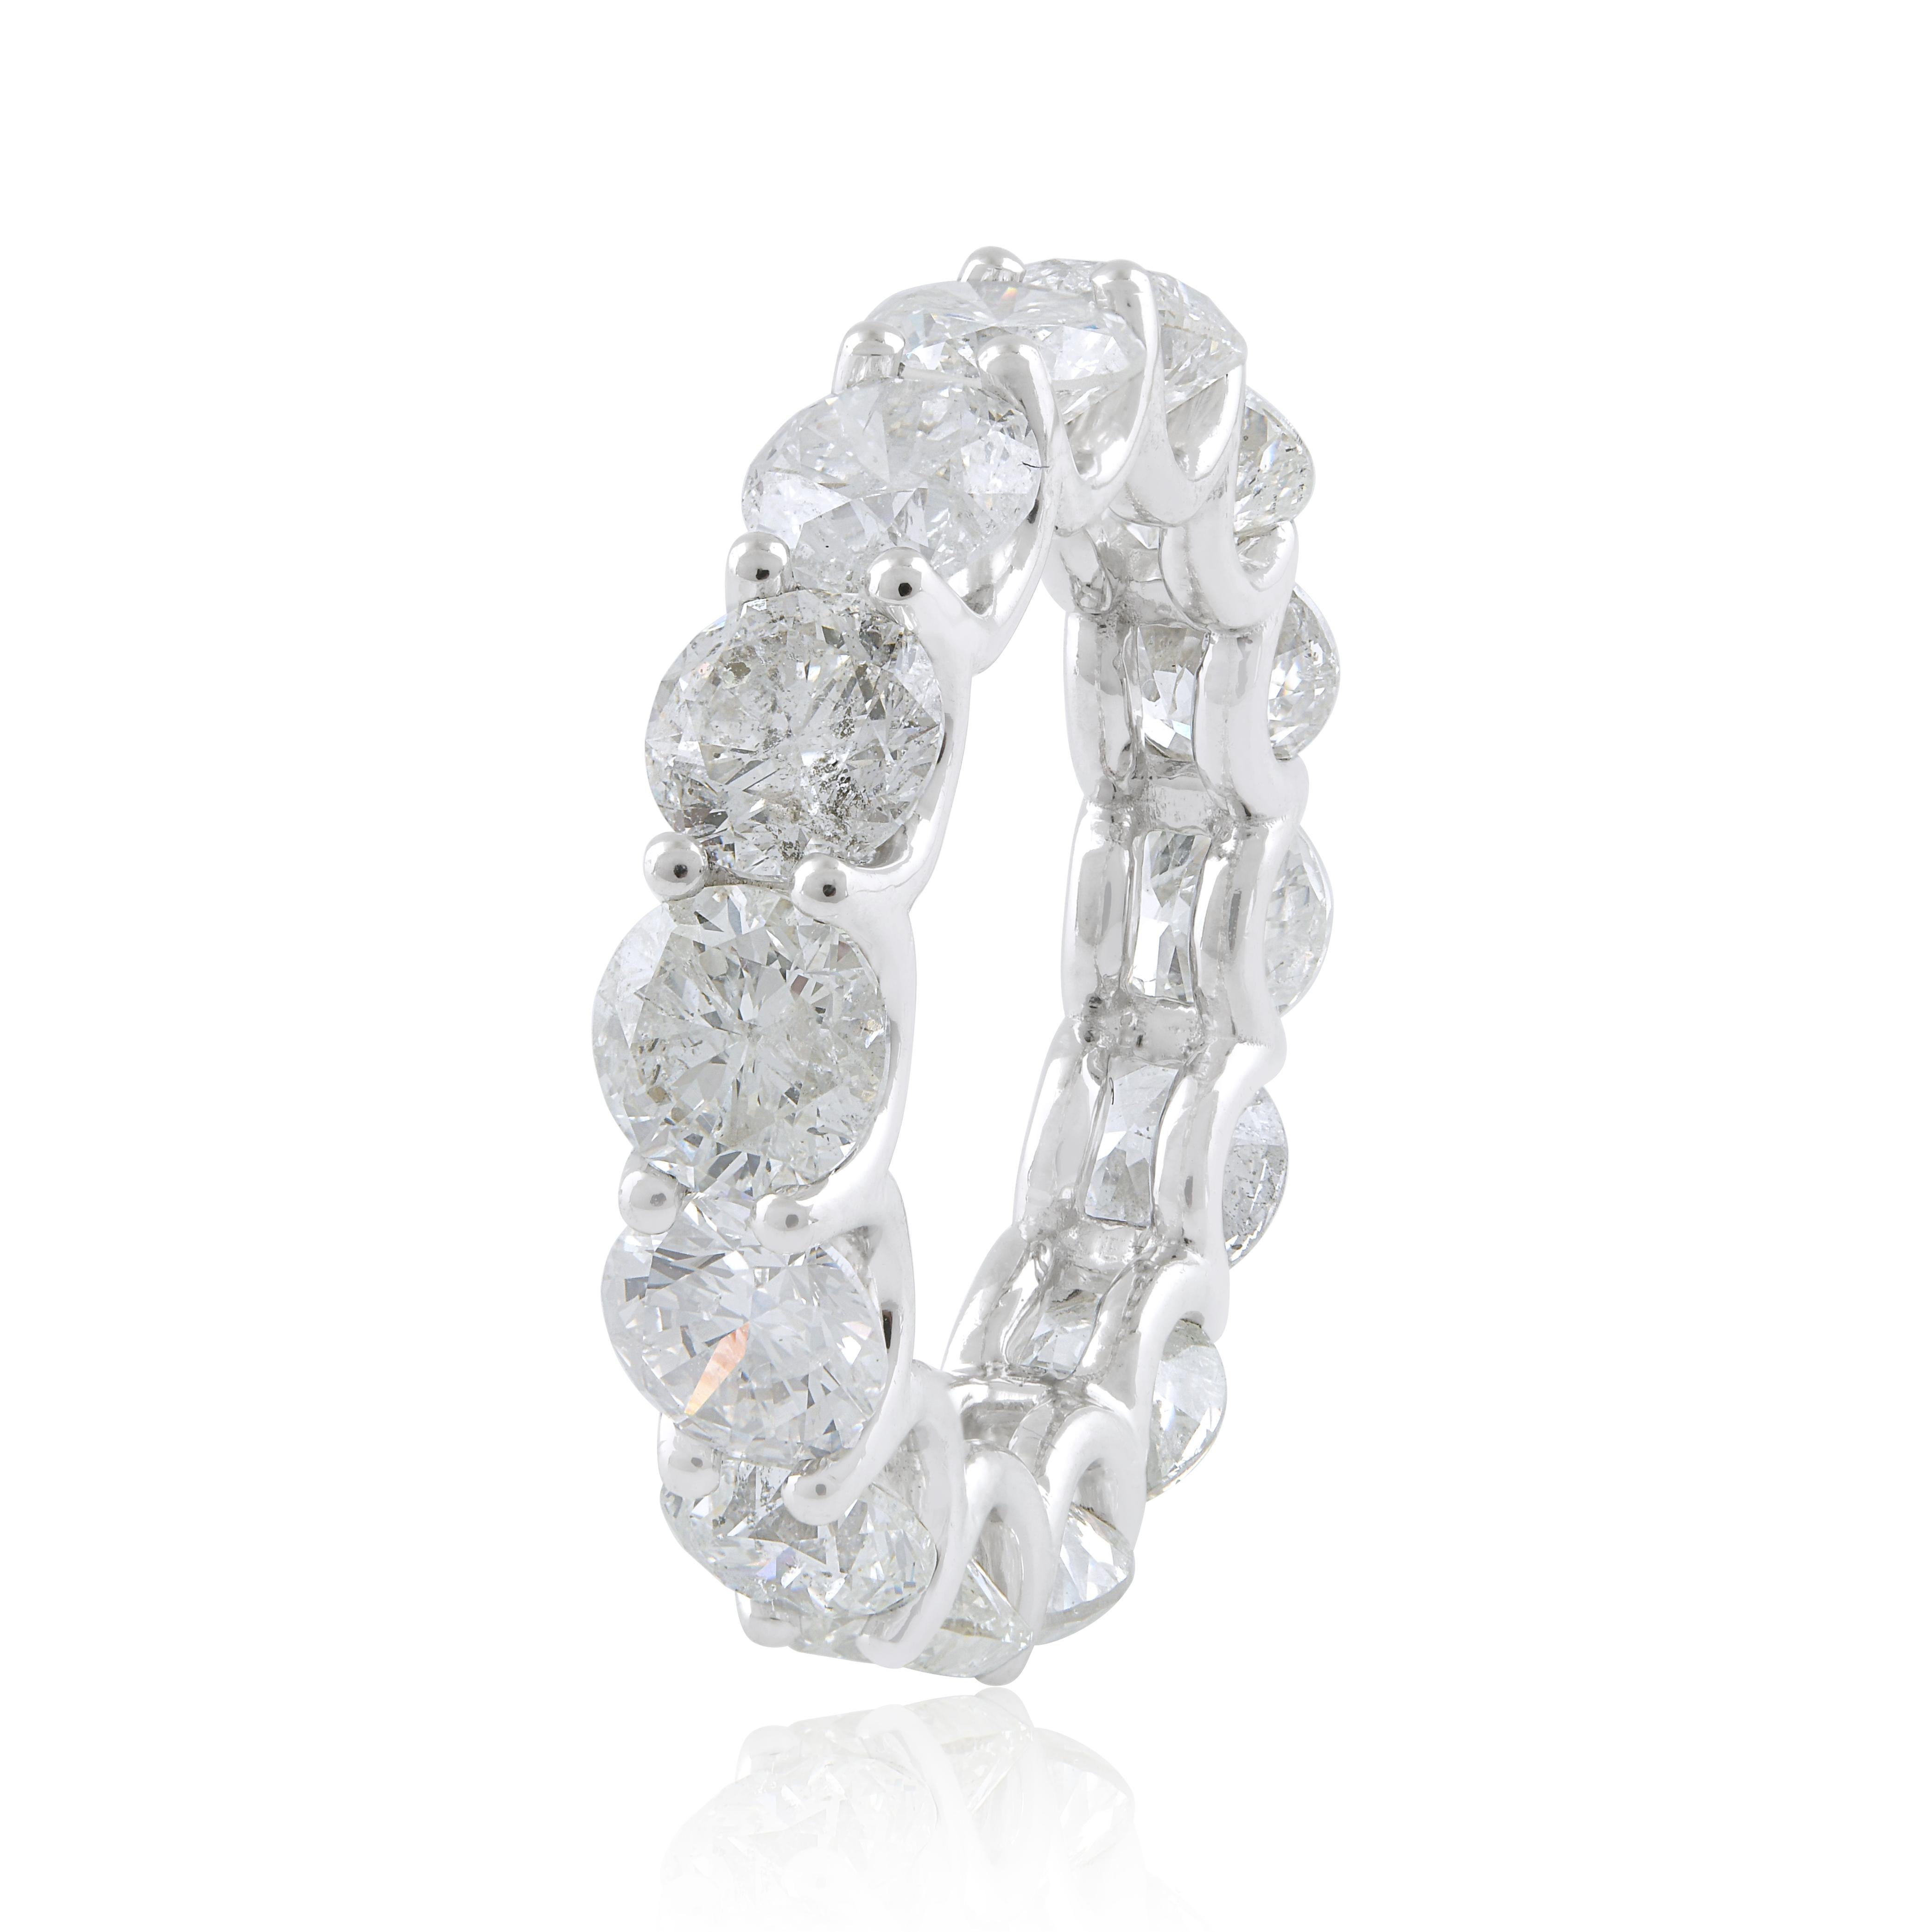 For Sale:  SI Clarity HI Color Round Diamond Eternity Band Ring 18k White Gold Fine Jewelry 3